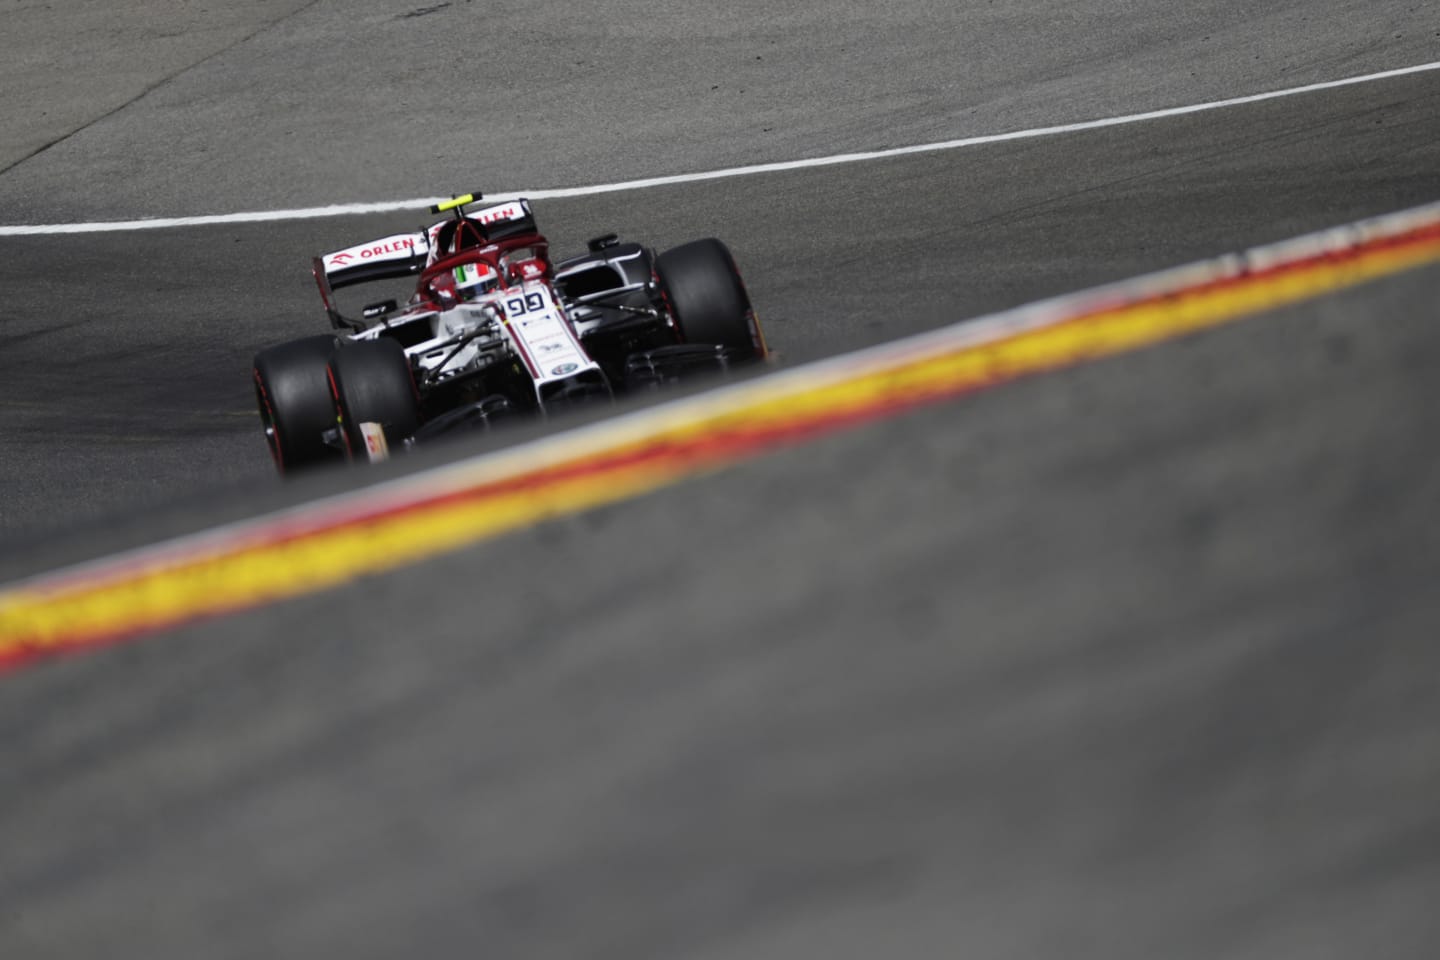 SPA, BELGIUM - AUGUST 29: Antonio Giovinazzi of Italy driving the (99) Alfa Romeo Racing C39 Ferrari drives during final practice for the F1 Grand Prix of Belgium at Circuit de Spa-Francorchamps on August 29, 2020 in Spa, Belgium. (Photo by Stephanie Lecocq/Pool via Getty Images)